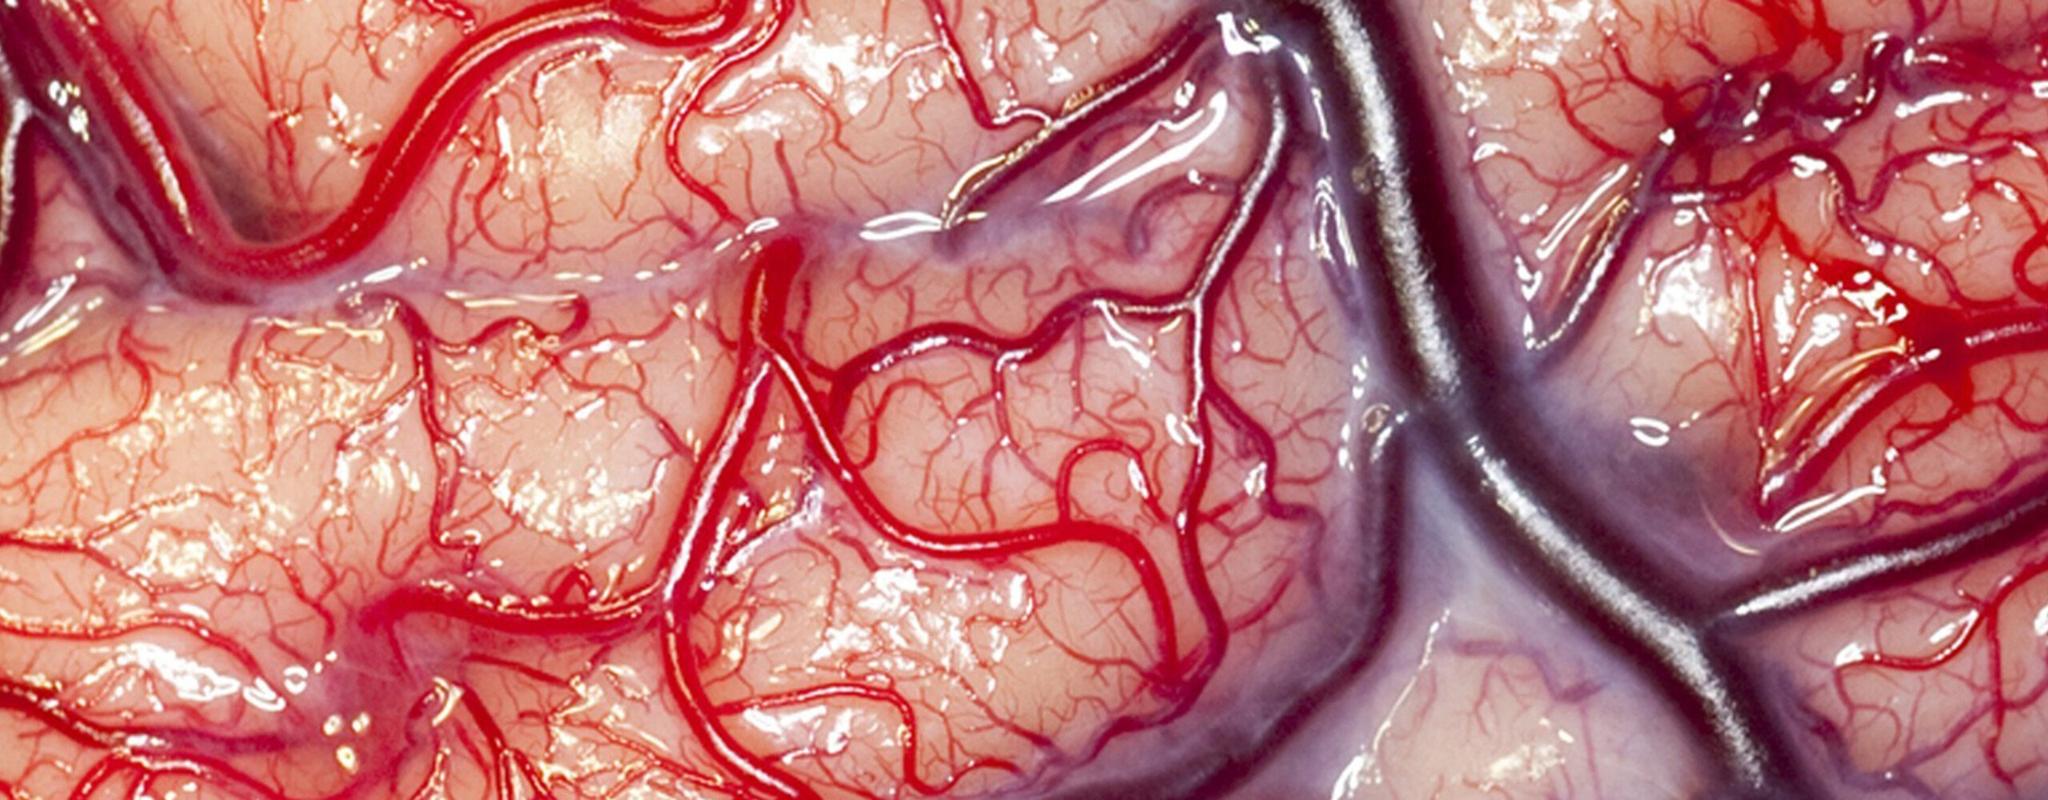 Overall winner for the 2012 Wellcome Image Awards. A photograph of the surface of a human brain belonging to an epileptic patient by Robert Ludlow, UCL Institute of Neurology, London.